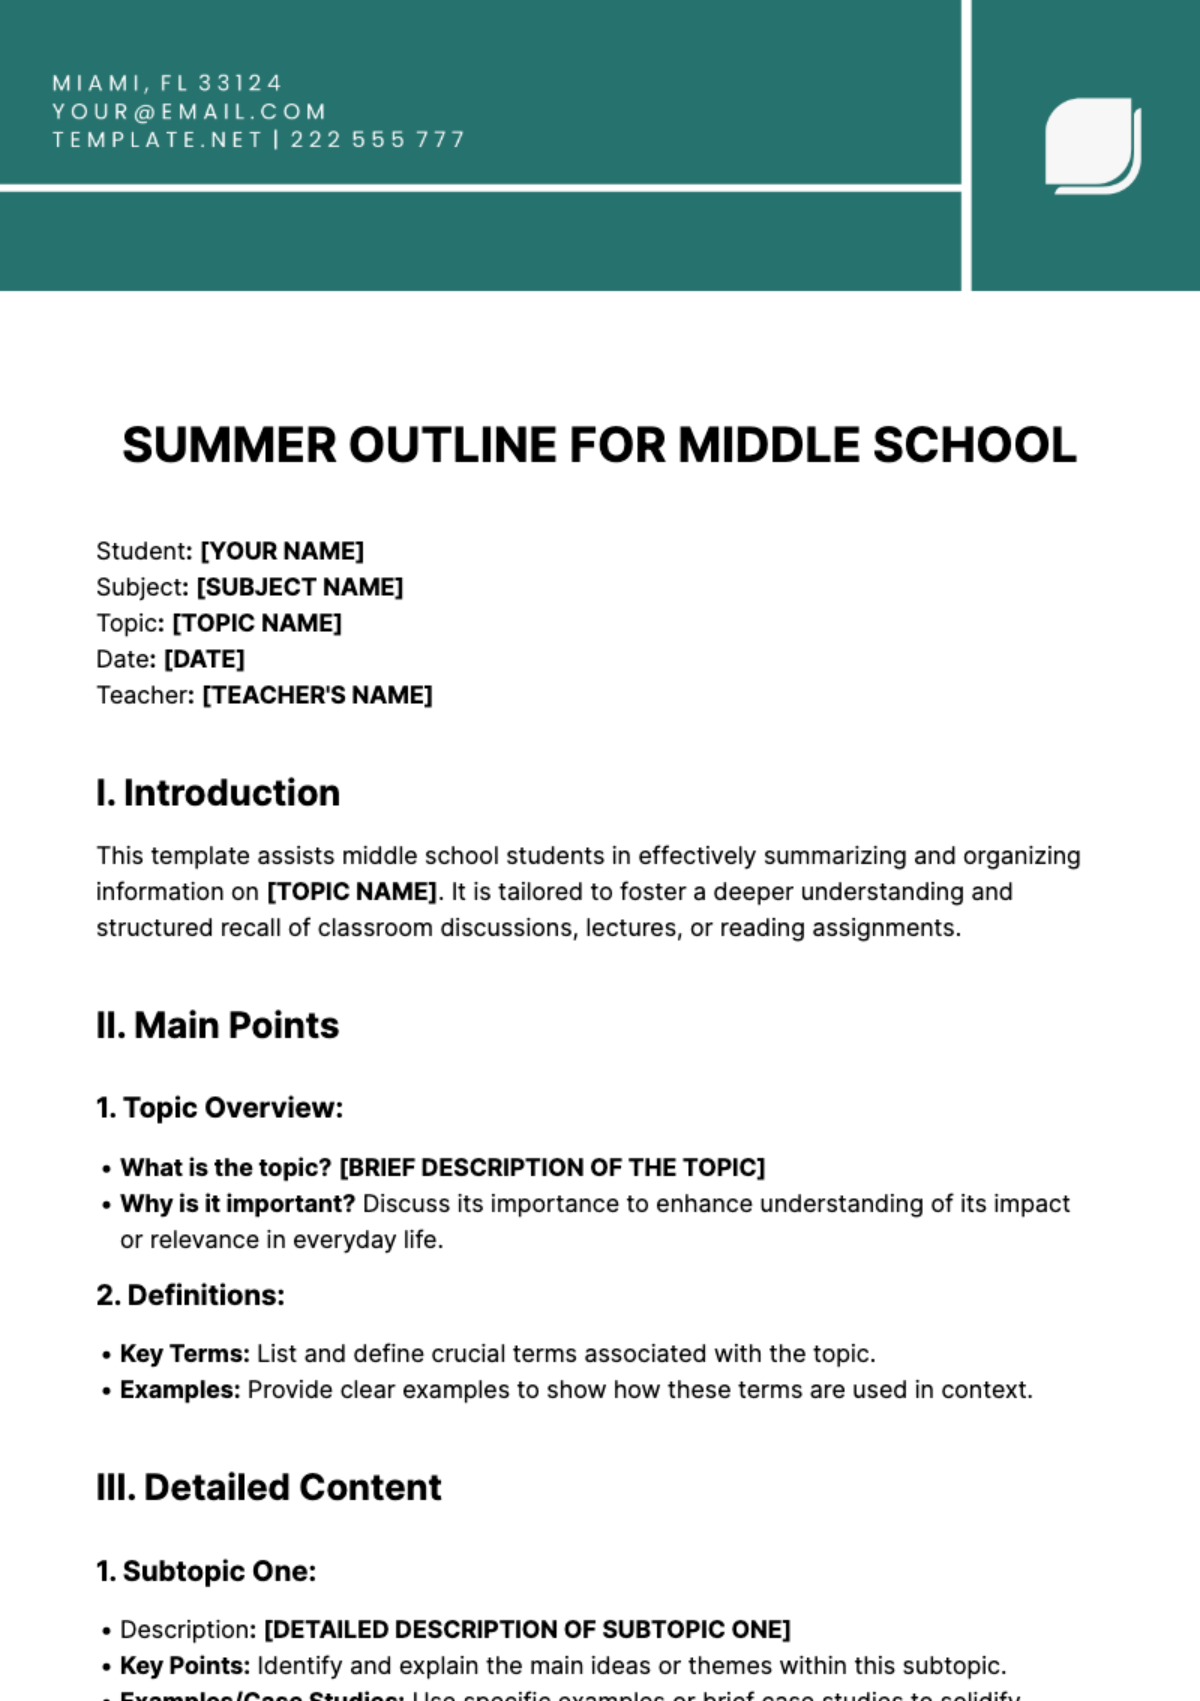 Summary Outline For Middle School Template